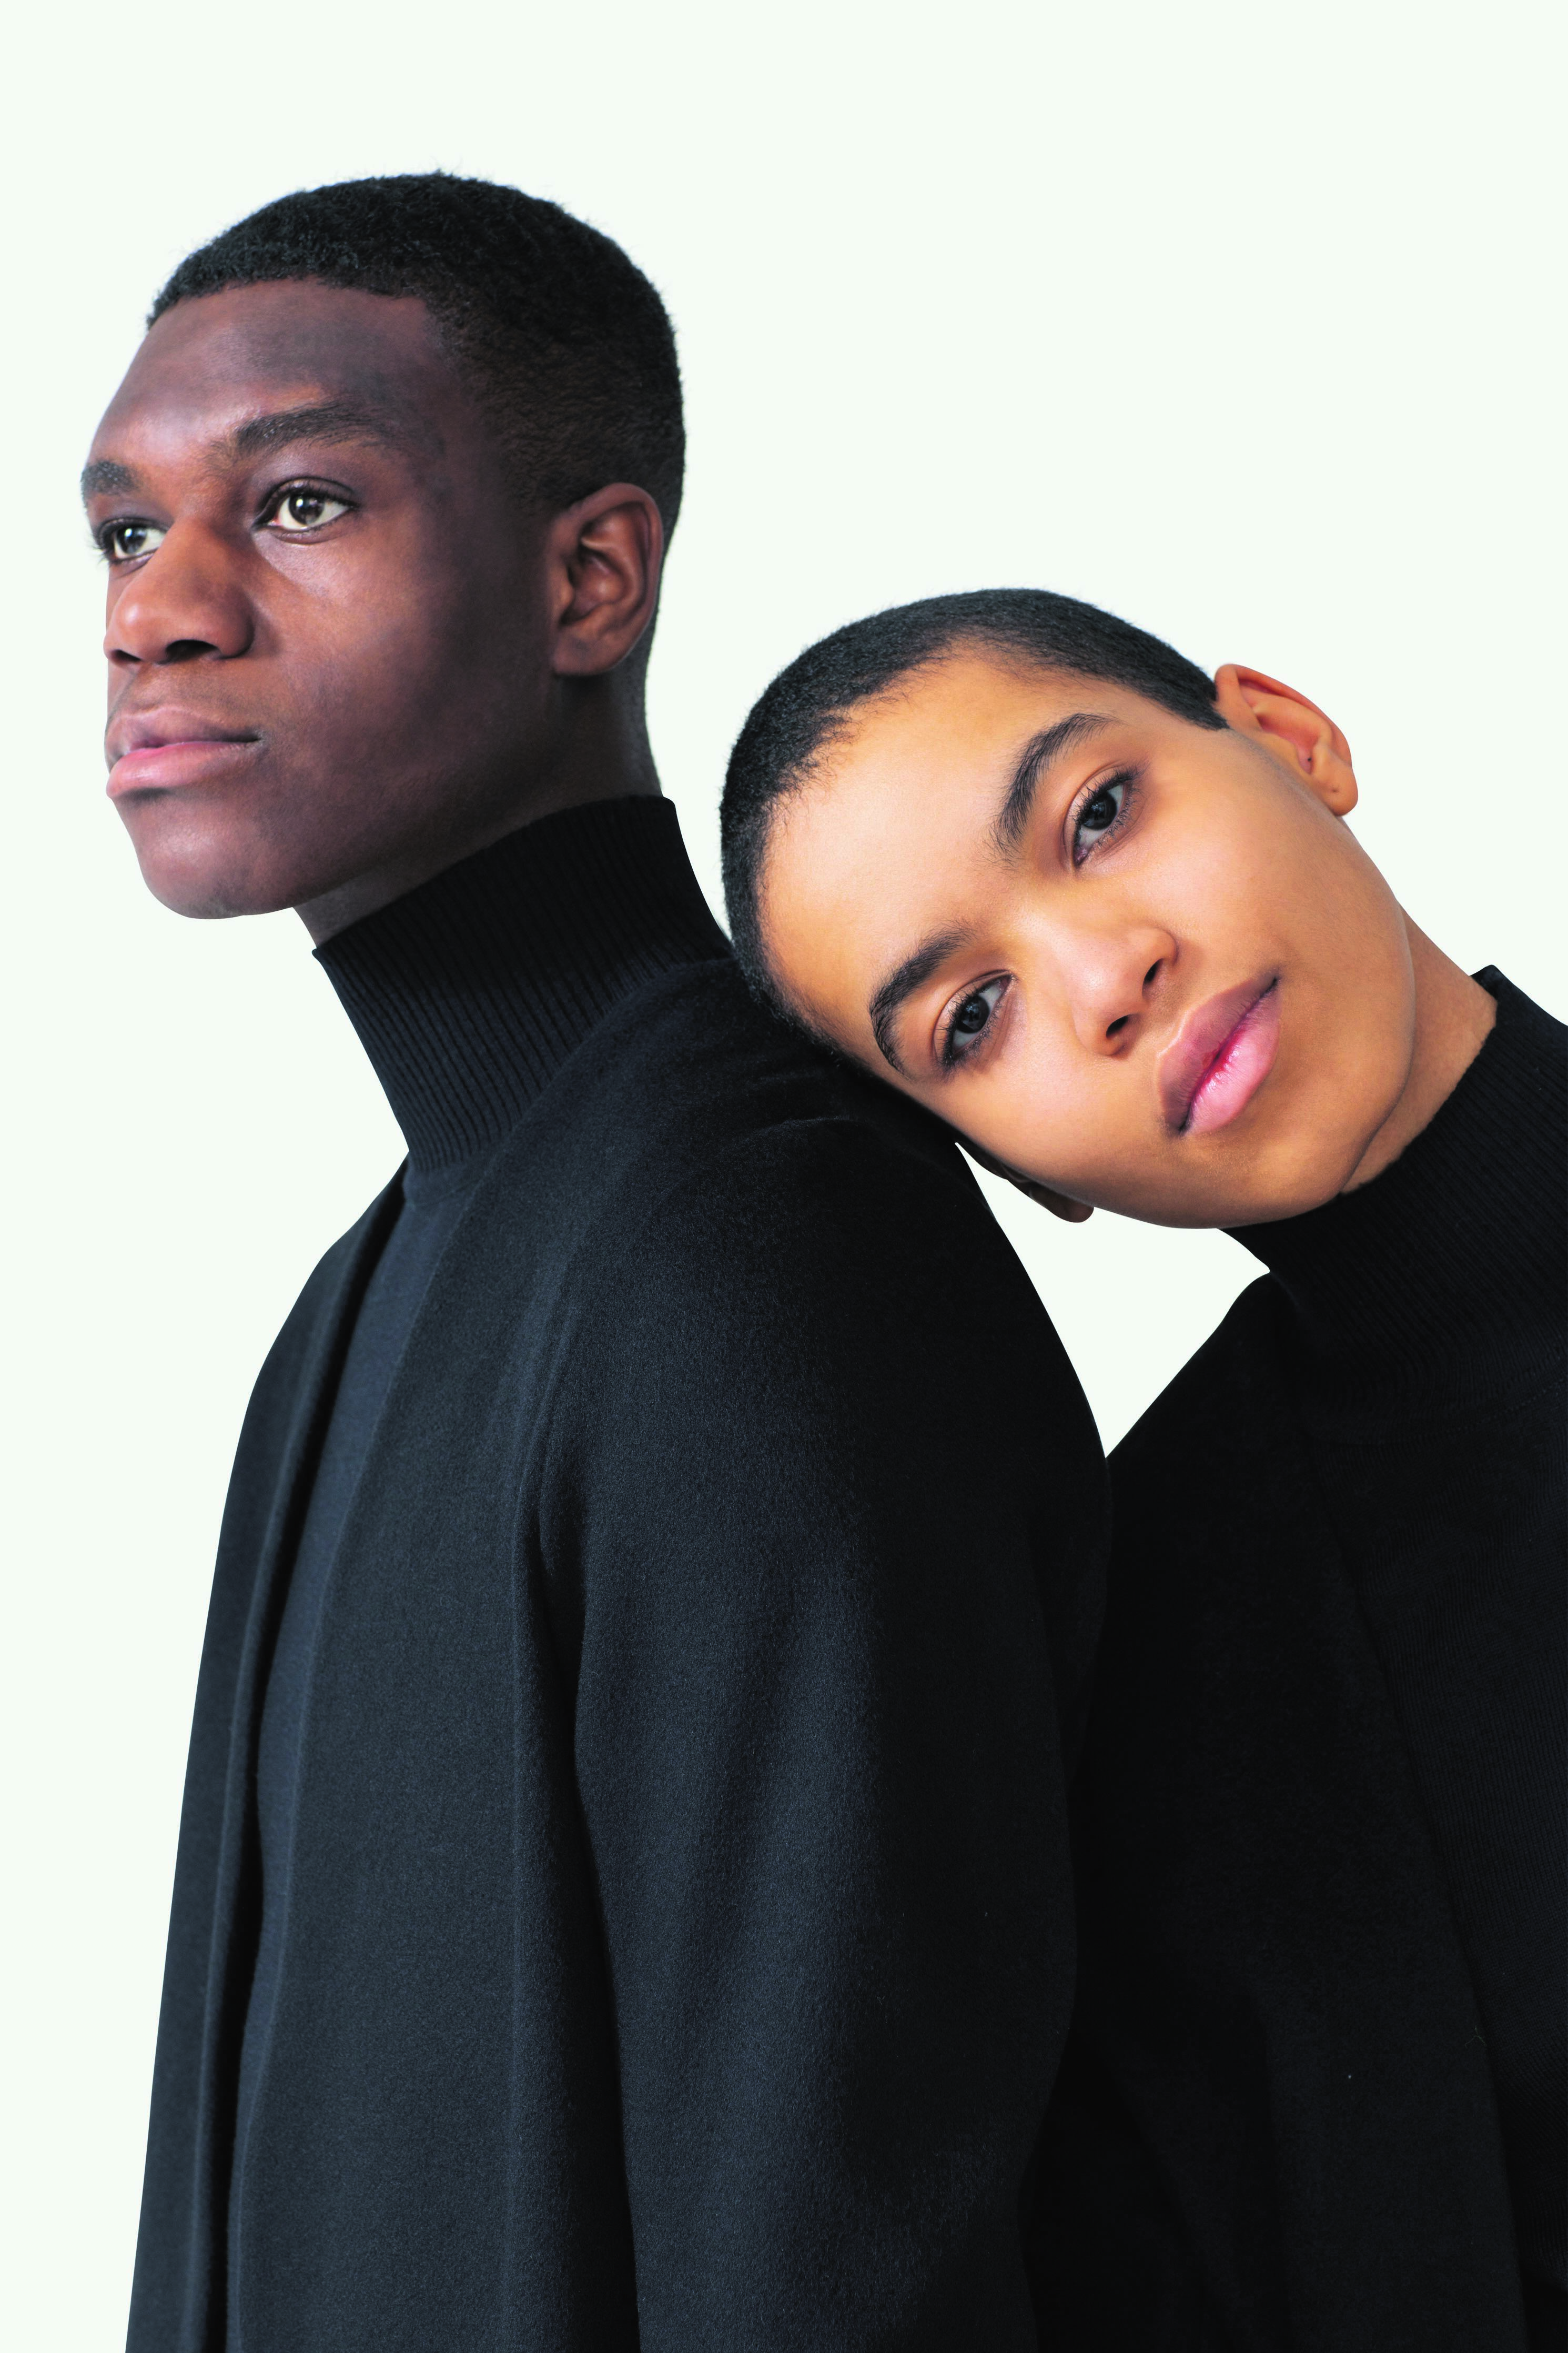 Two models wearing black unisex fashion clothes.